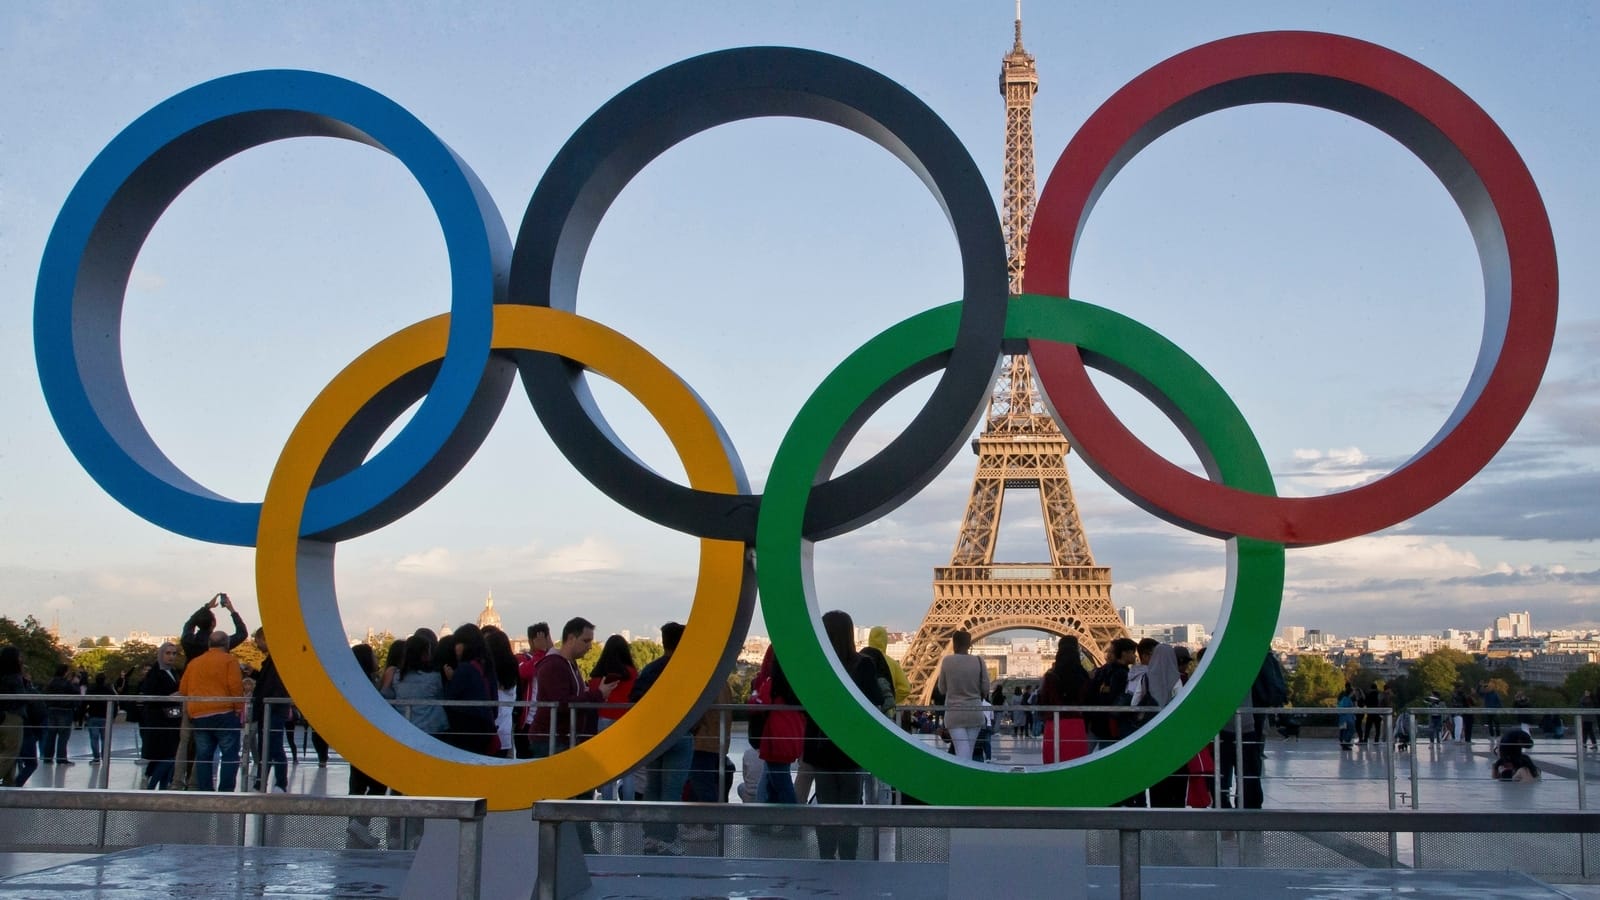 Sex makes a comeback at Paris 2024 Olympics, 3 lakh condoms to be distributed at the games